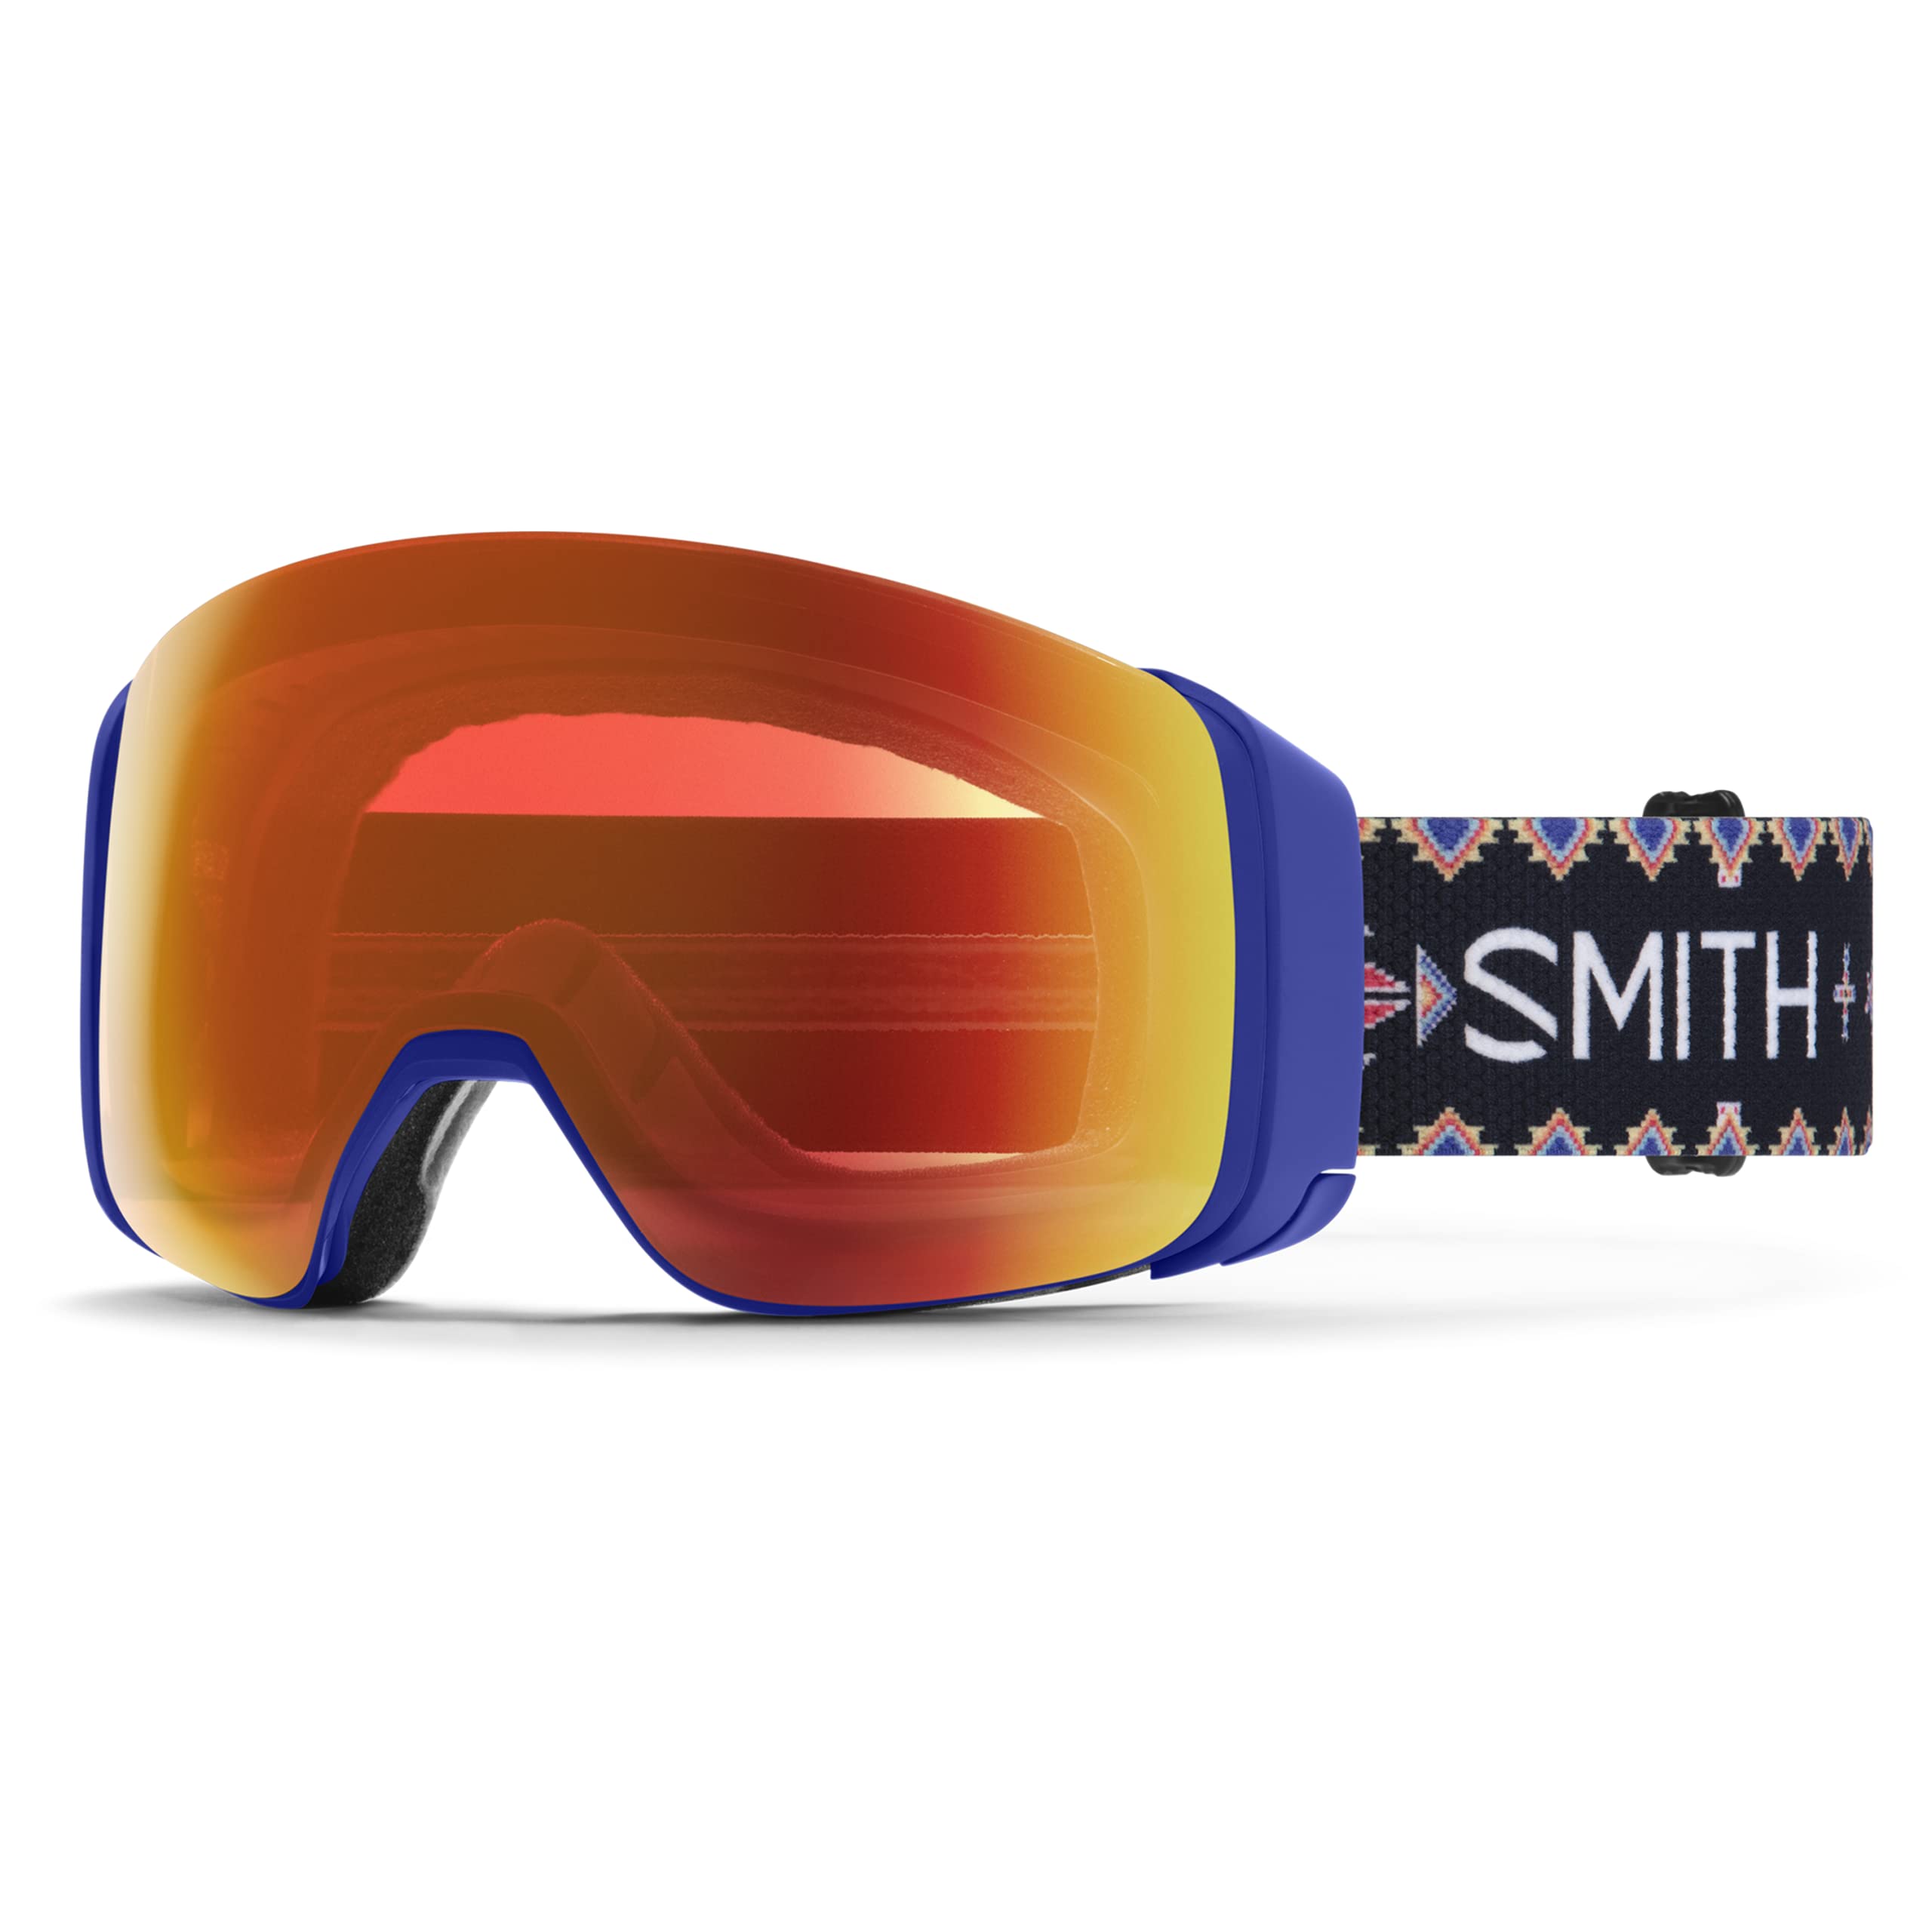 Smith 4D MAG Goggles with ChromaPop Lens